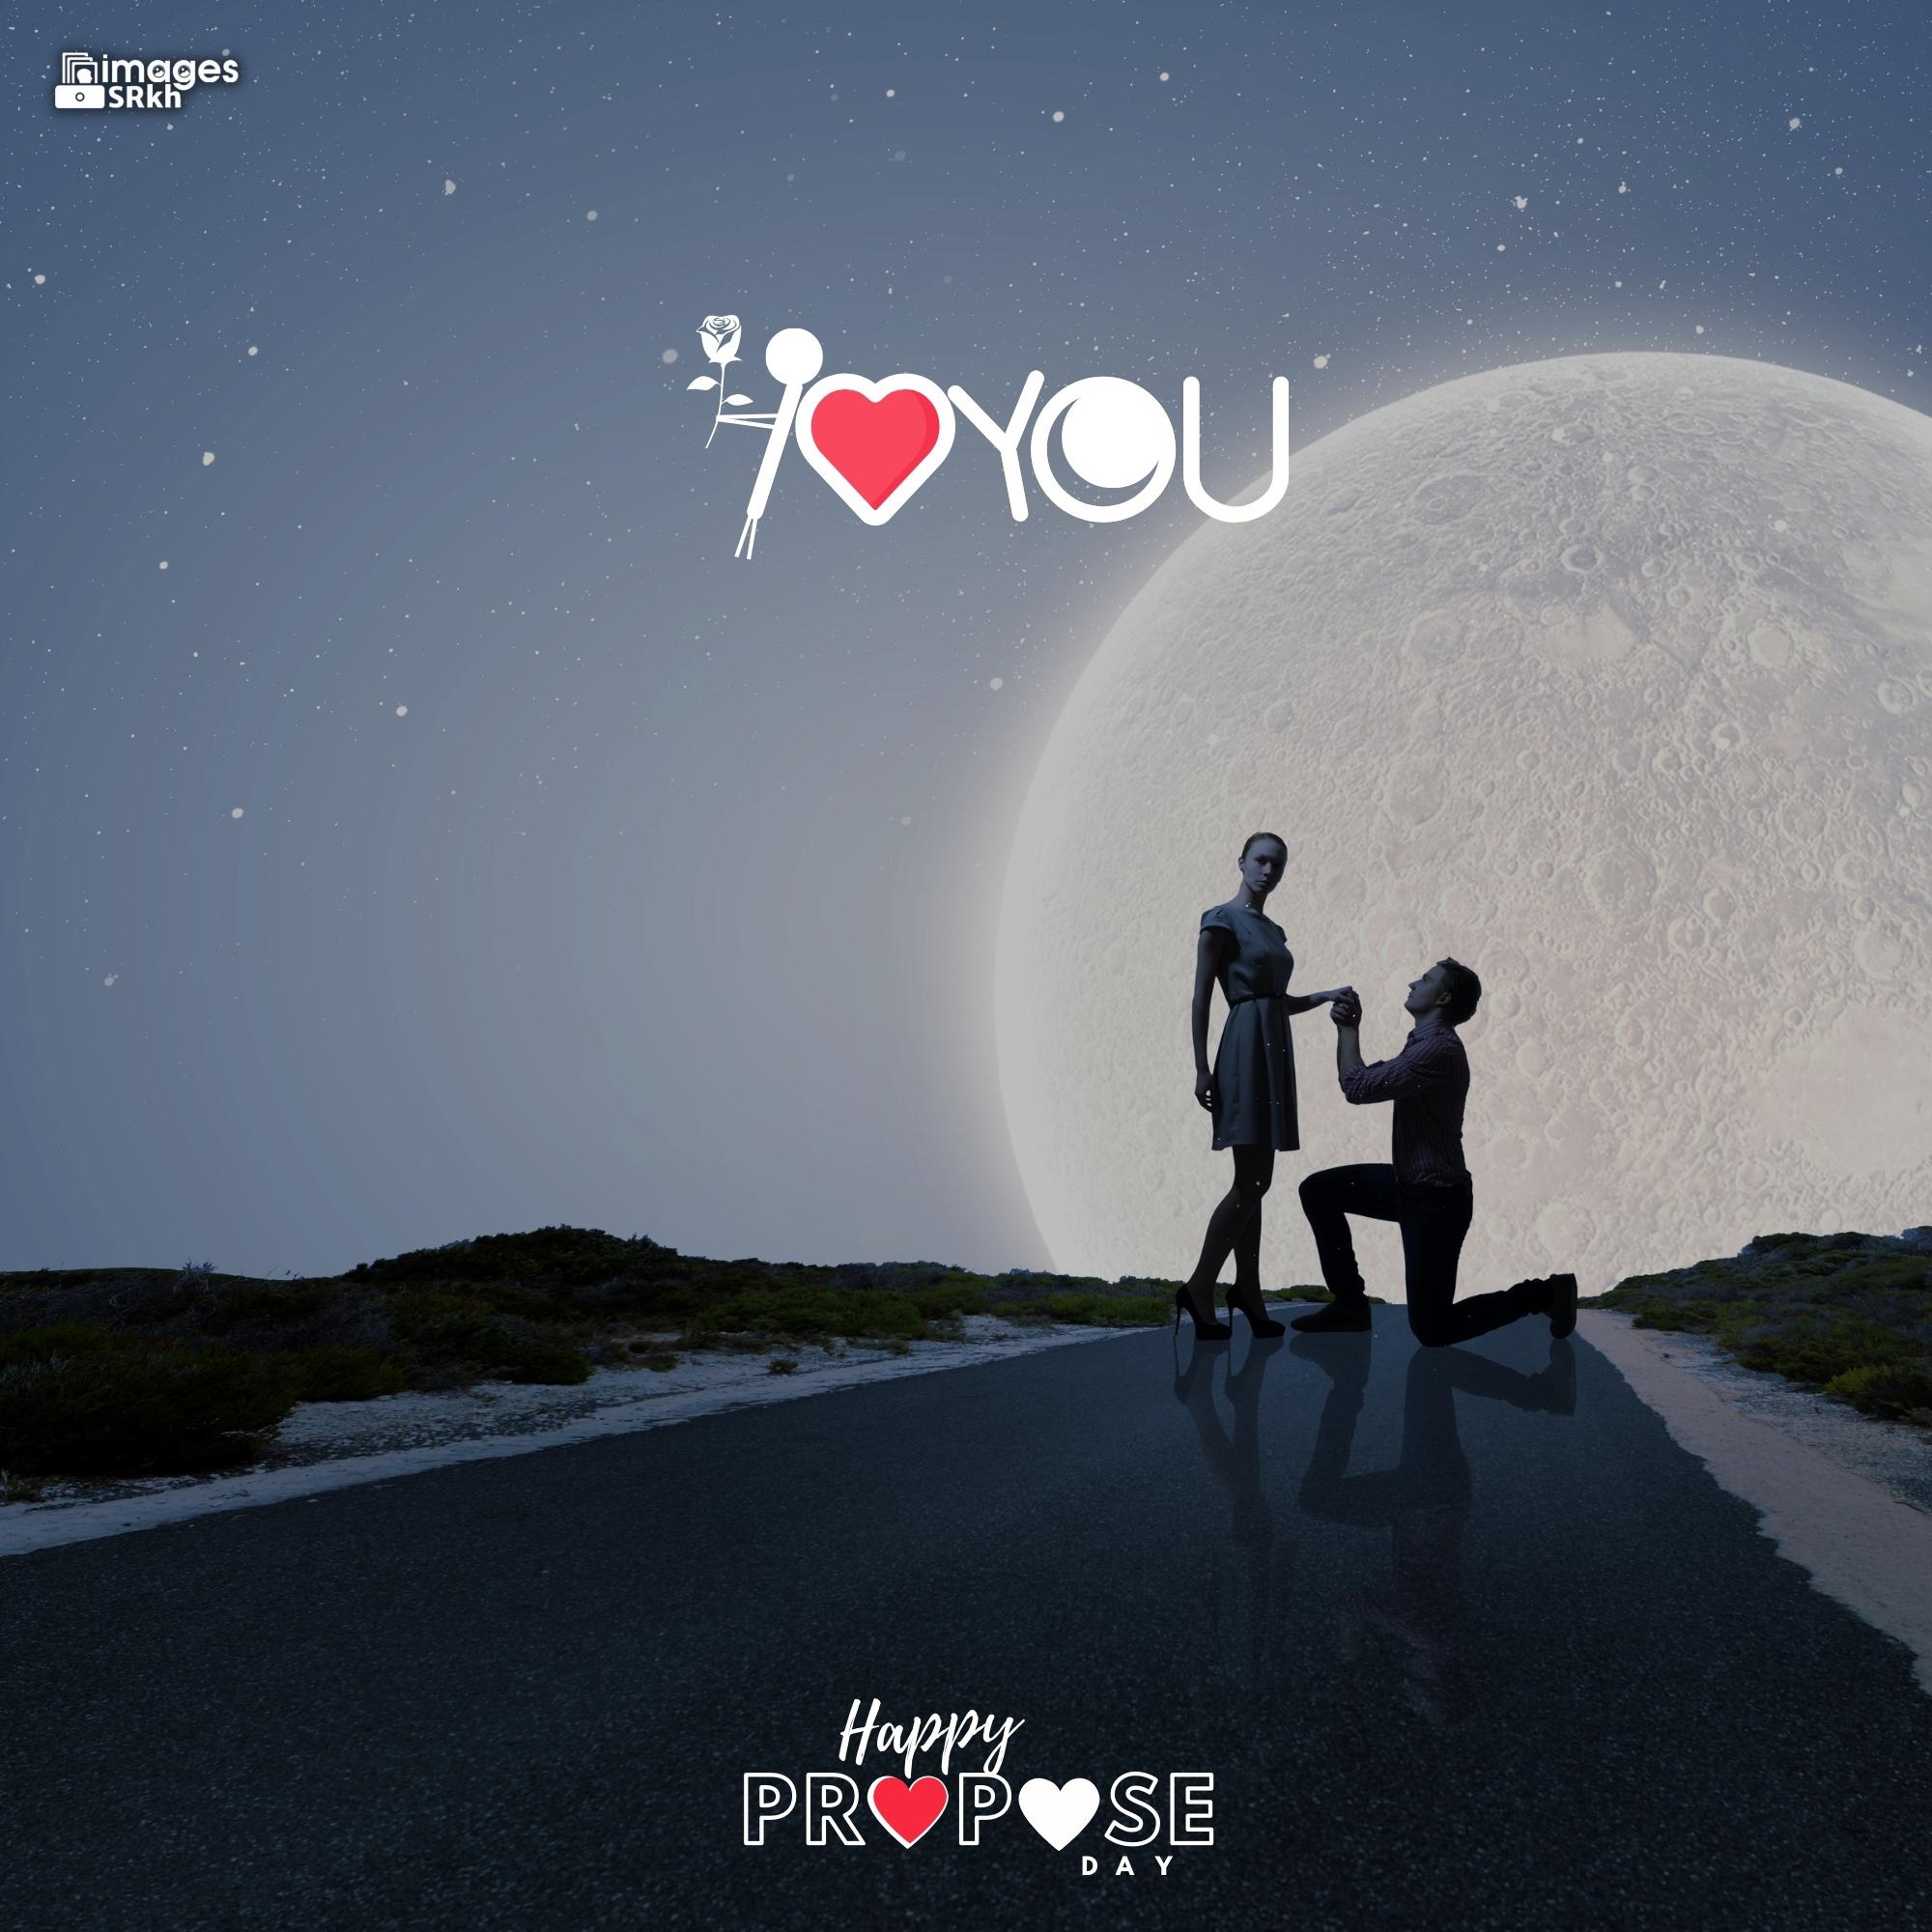 Happy Propose Day Images | 345 | I LOVE YOU